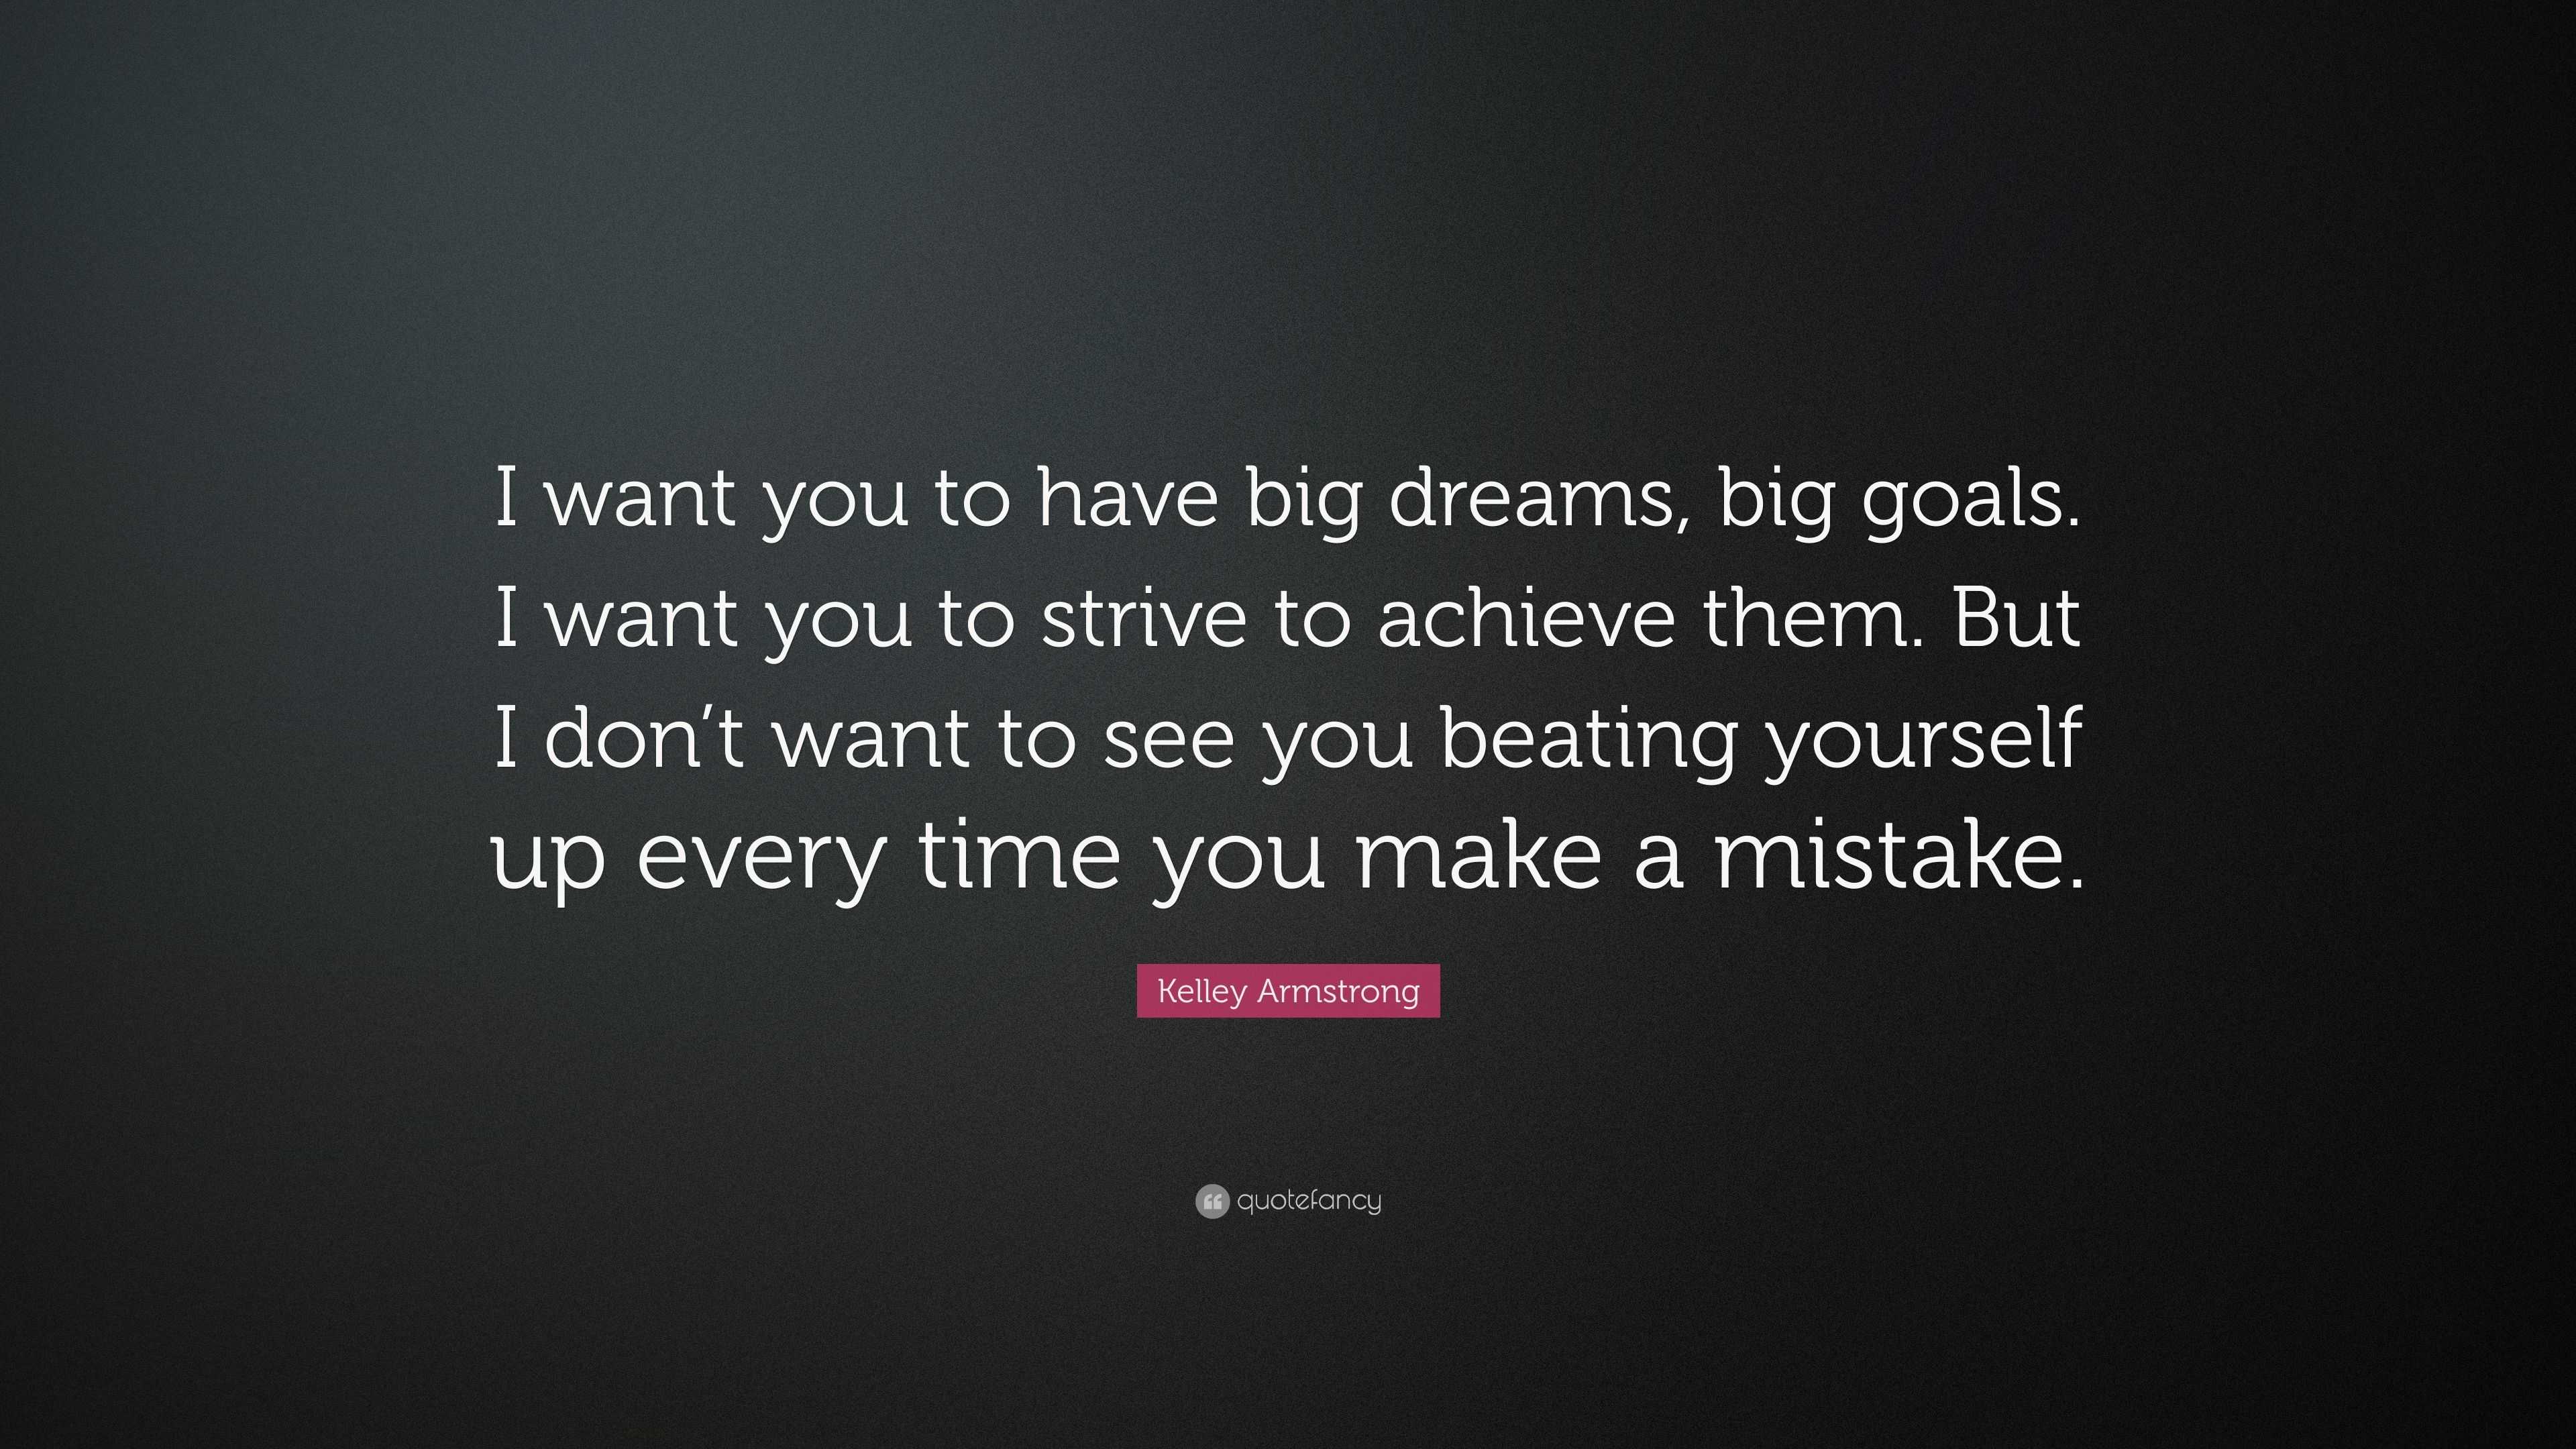 Motivational Quotes on X: If you don't have big dreams and goals